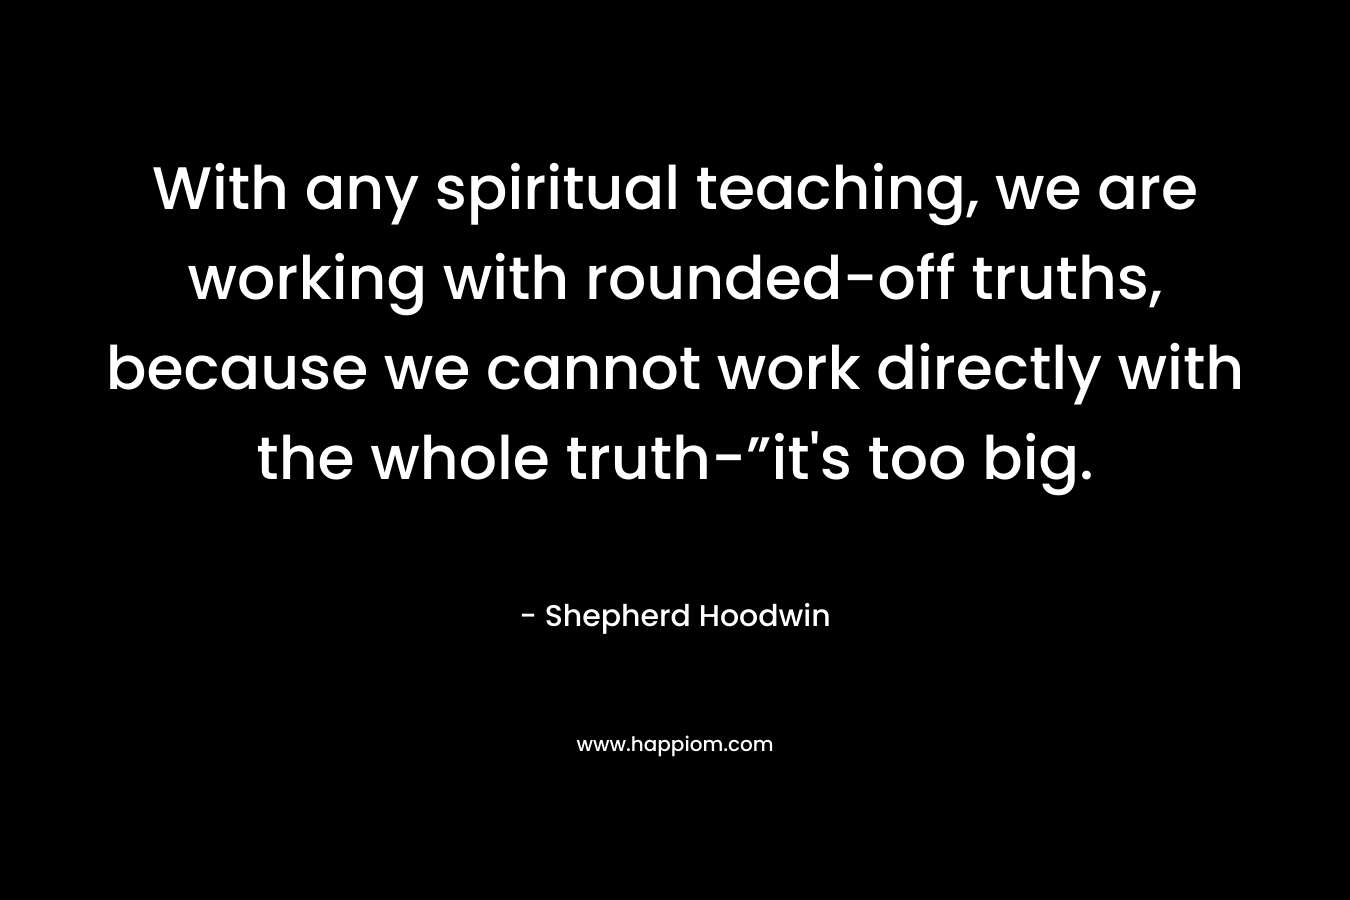 With any spiritual teaching, we are working with rounded-off truths, because we cannot work directly with the whole truth-”it’s too big. – Shepherd Hoodwin